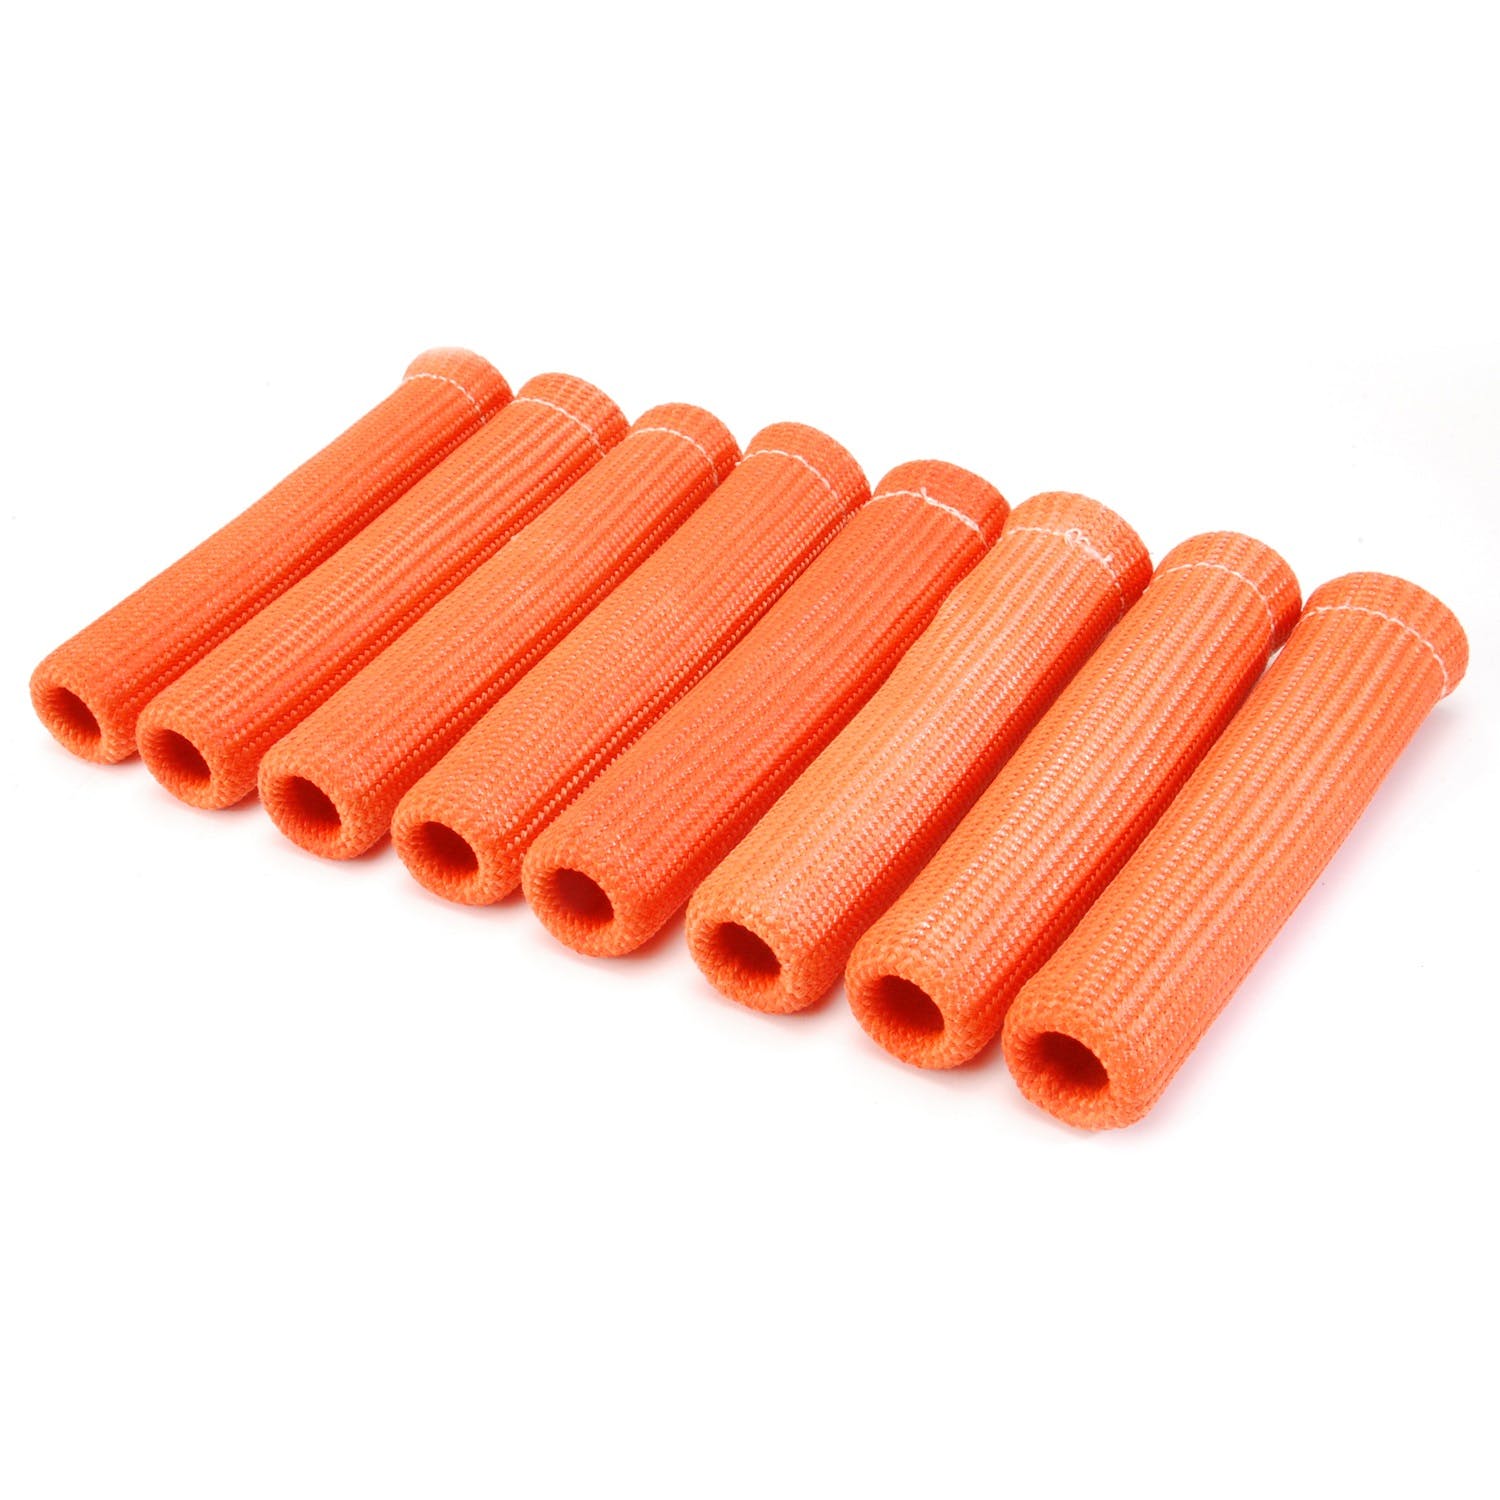 Design Engineering, Inc. 10572 Protect-A-Boot - 6 - 8-pack - Orange